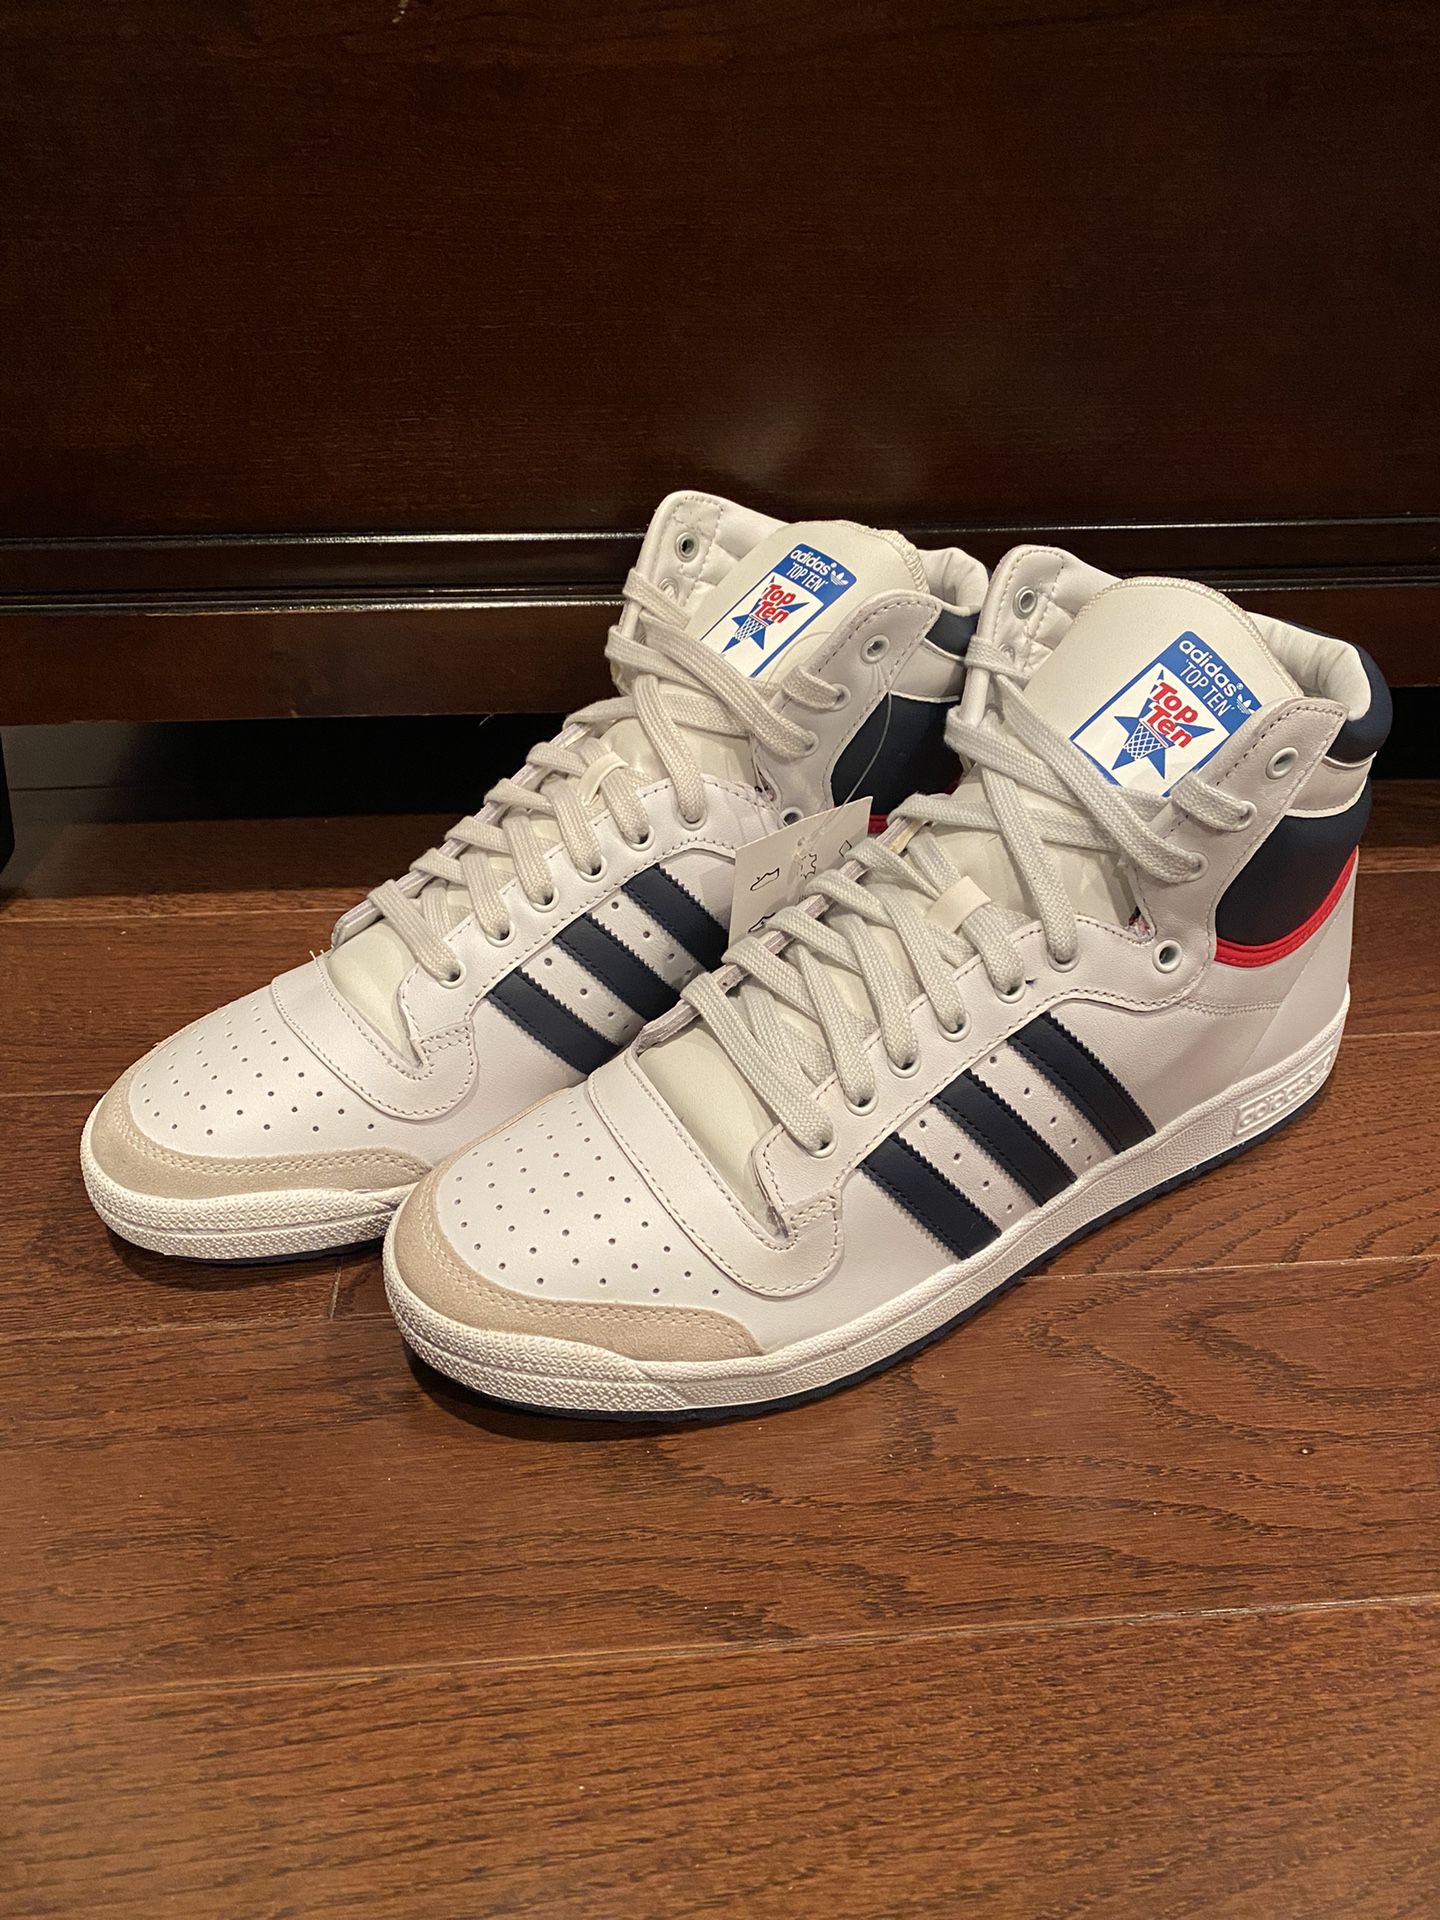 Adidas Top Ten Hi 40th Anniversary, Size 13 Sale in Staten Island, NY - OfferUp